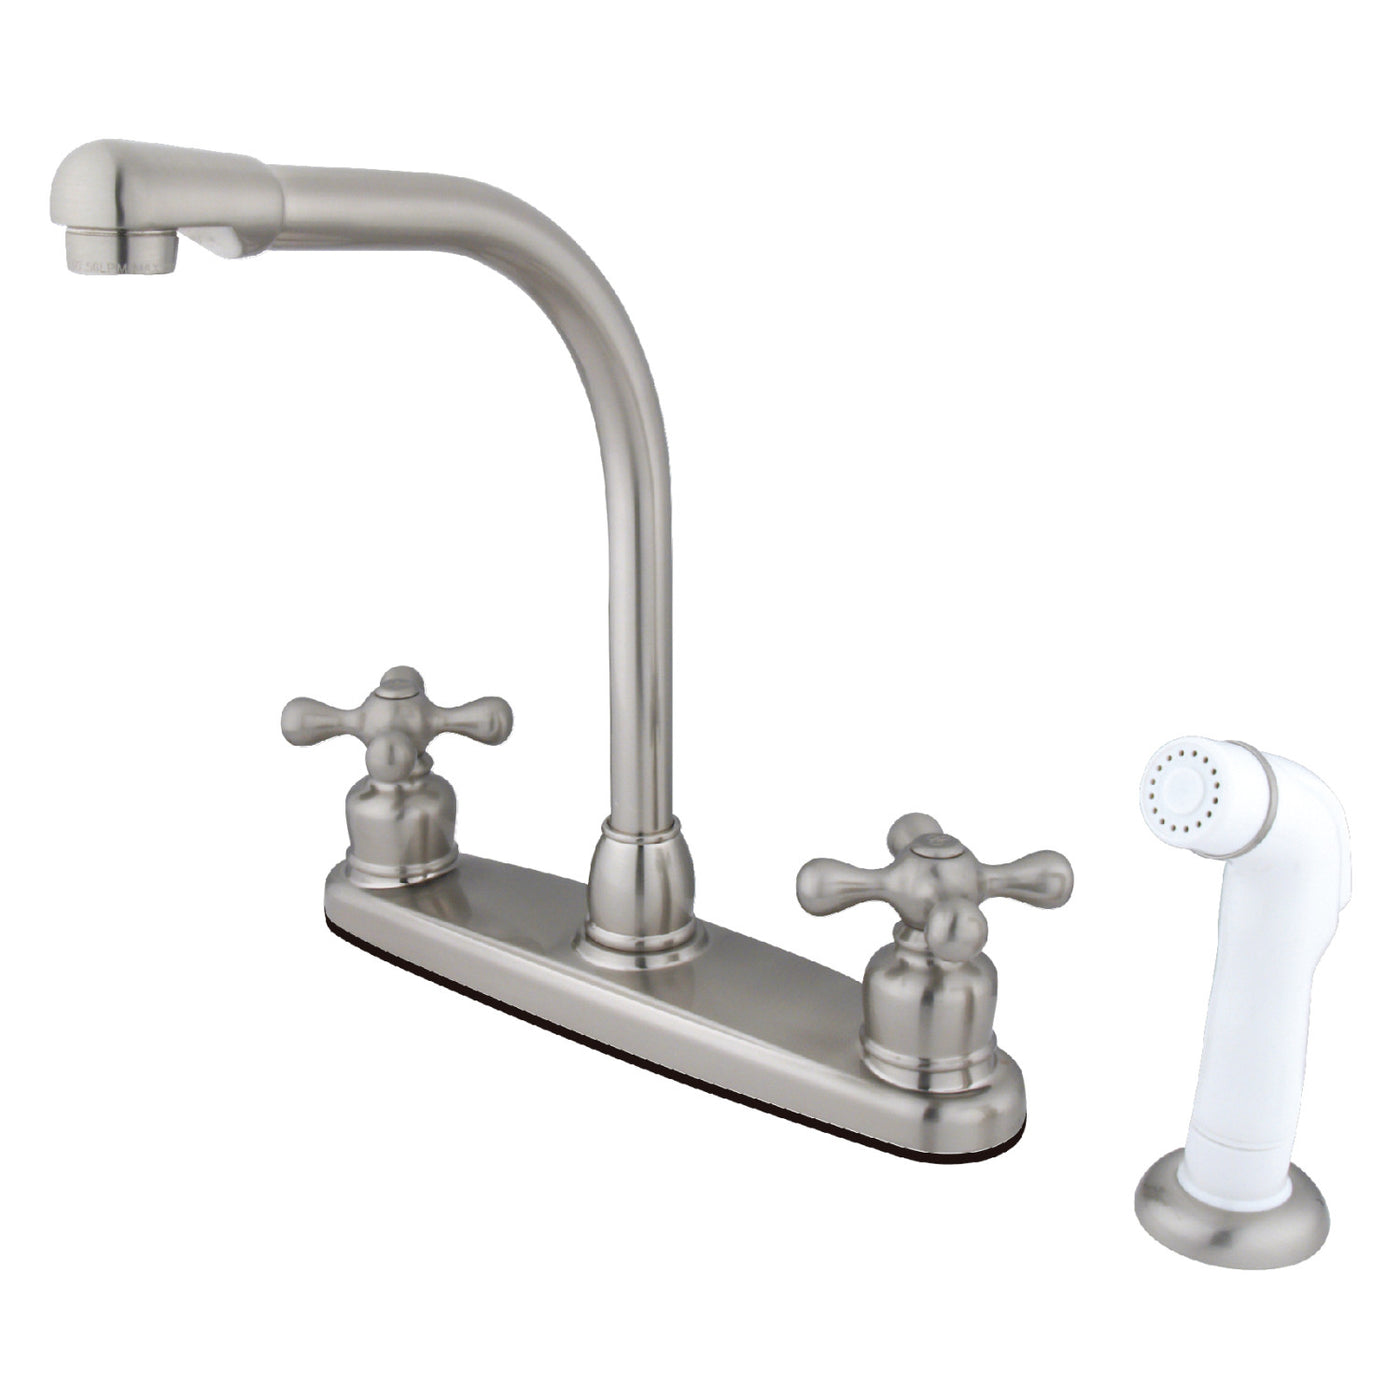 Elements of Design EB718AX Centerset Kitchen Faucet, Brushed Nickel